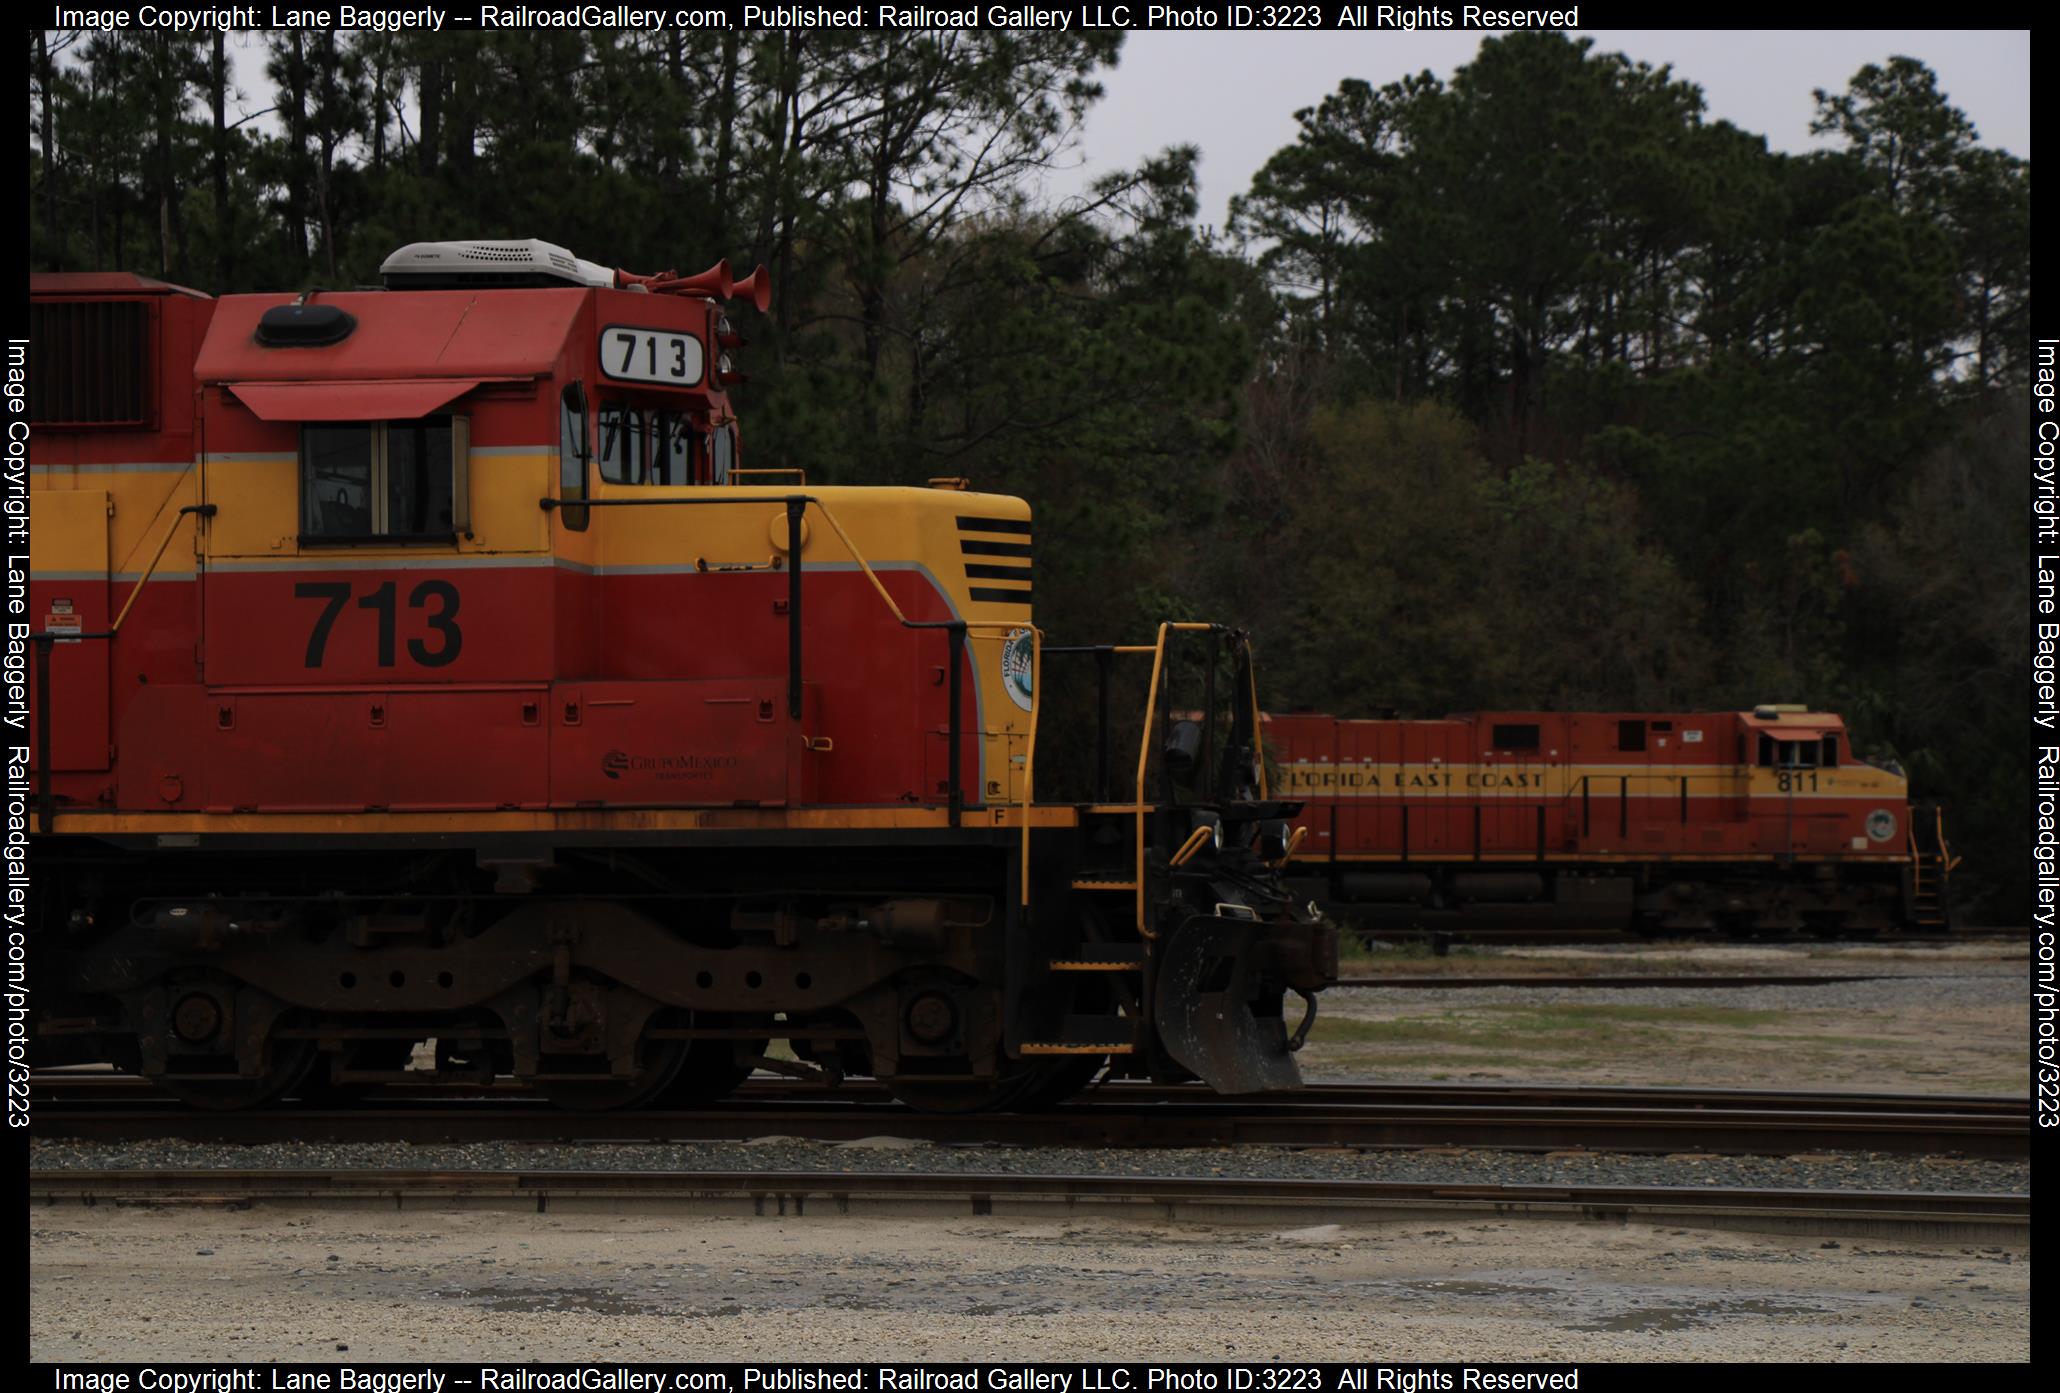 FEC 713 is a class EMD SD40-2 and  is pictured in Jacksonville, North Carolina, United States.  This was taken along the FEC Main on the Florida East Coast Railway. Photo Copyright: Lane Baggerly uploaded to Railroad Gallery on 03/21/2024. This photograph of FEC 713 was taken on Monday, March 04, 2024. All Rights Reserved. 